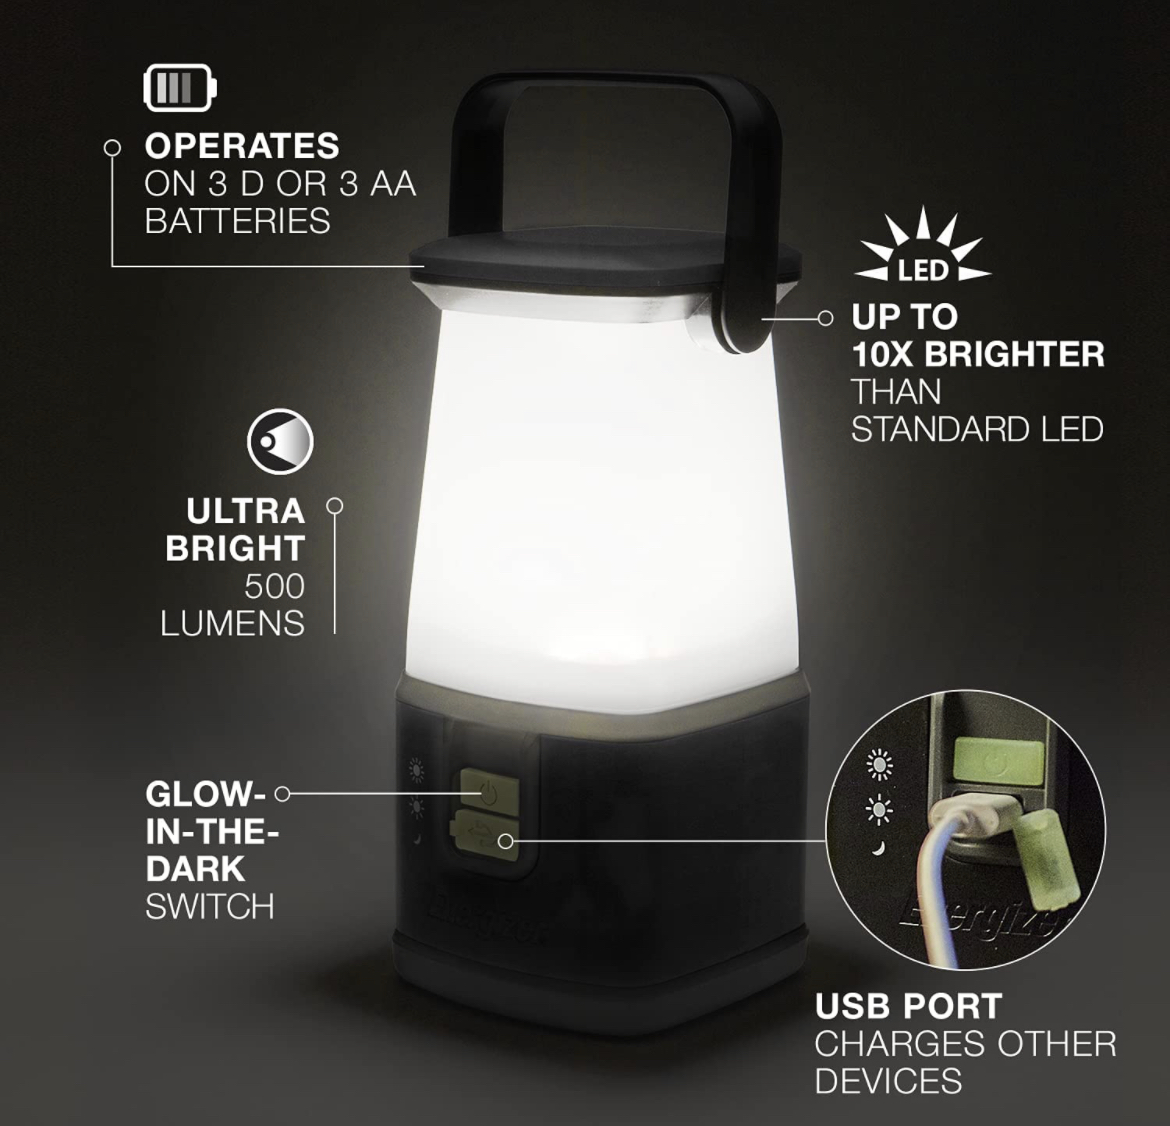 ENERGIZER LED Camping Lantern 360 PRO, IPX4 Water Resistant Tent Light, Ultra Bright Battery Powered Lanterns $10.97